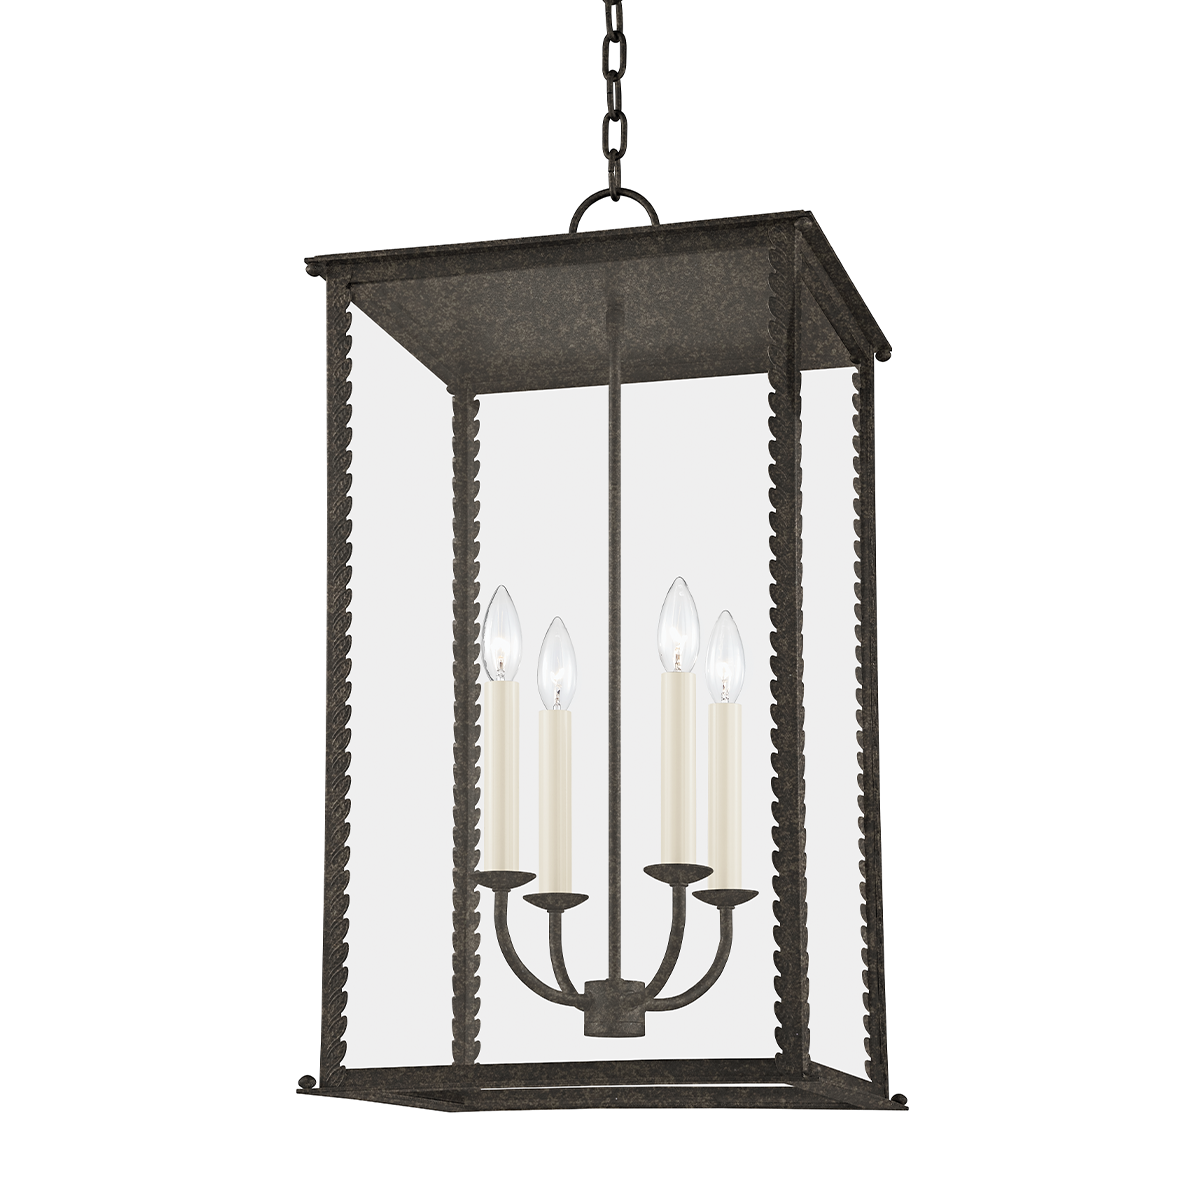 Troy ZUMA 4 LIGHT LARGE EXTERIOR LANTERN F6715 Outdoor l Wall Troy Lighting FRENCH IRON  